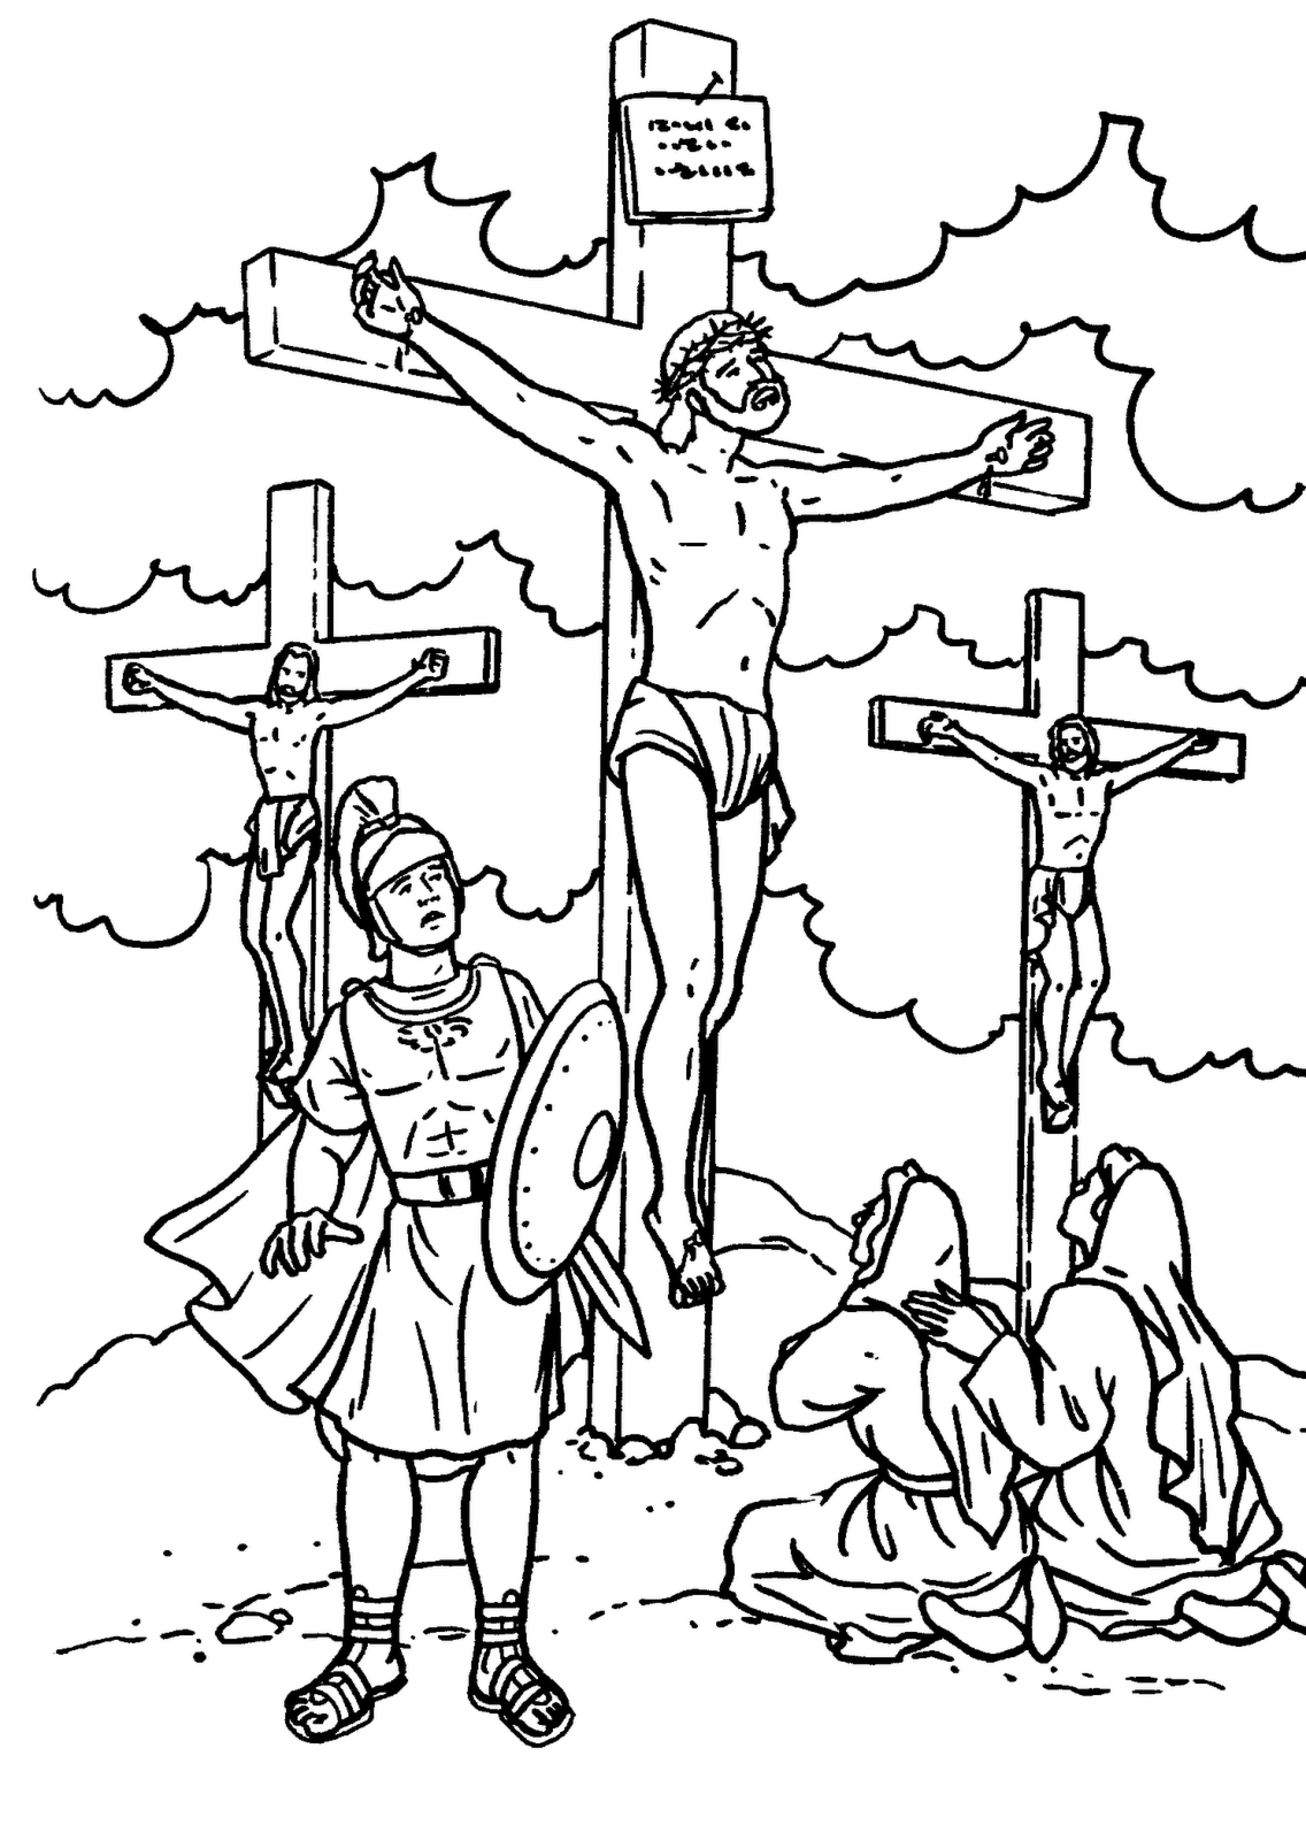 Jesus died on the cross for our sins | Sunday school coloring pages,  Christian coloring, Bible coloring pages